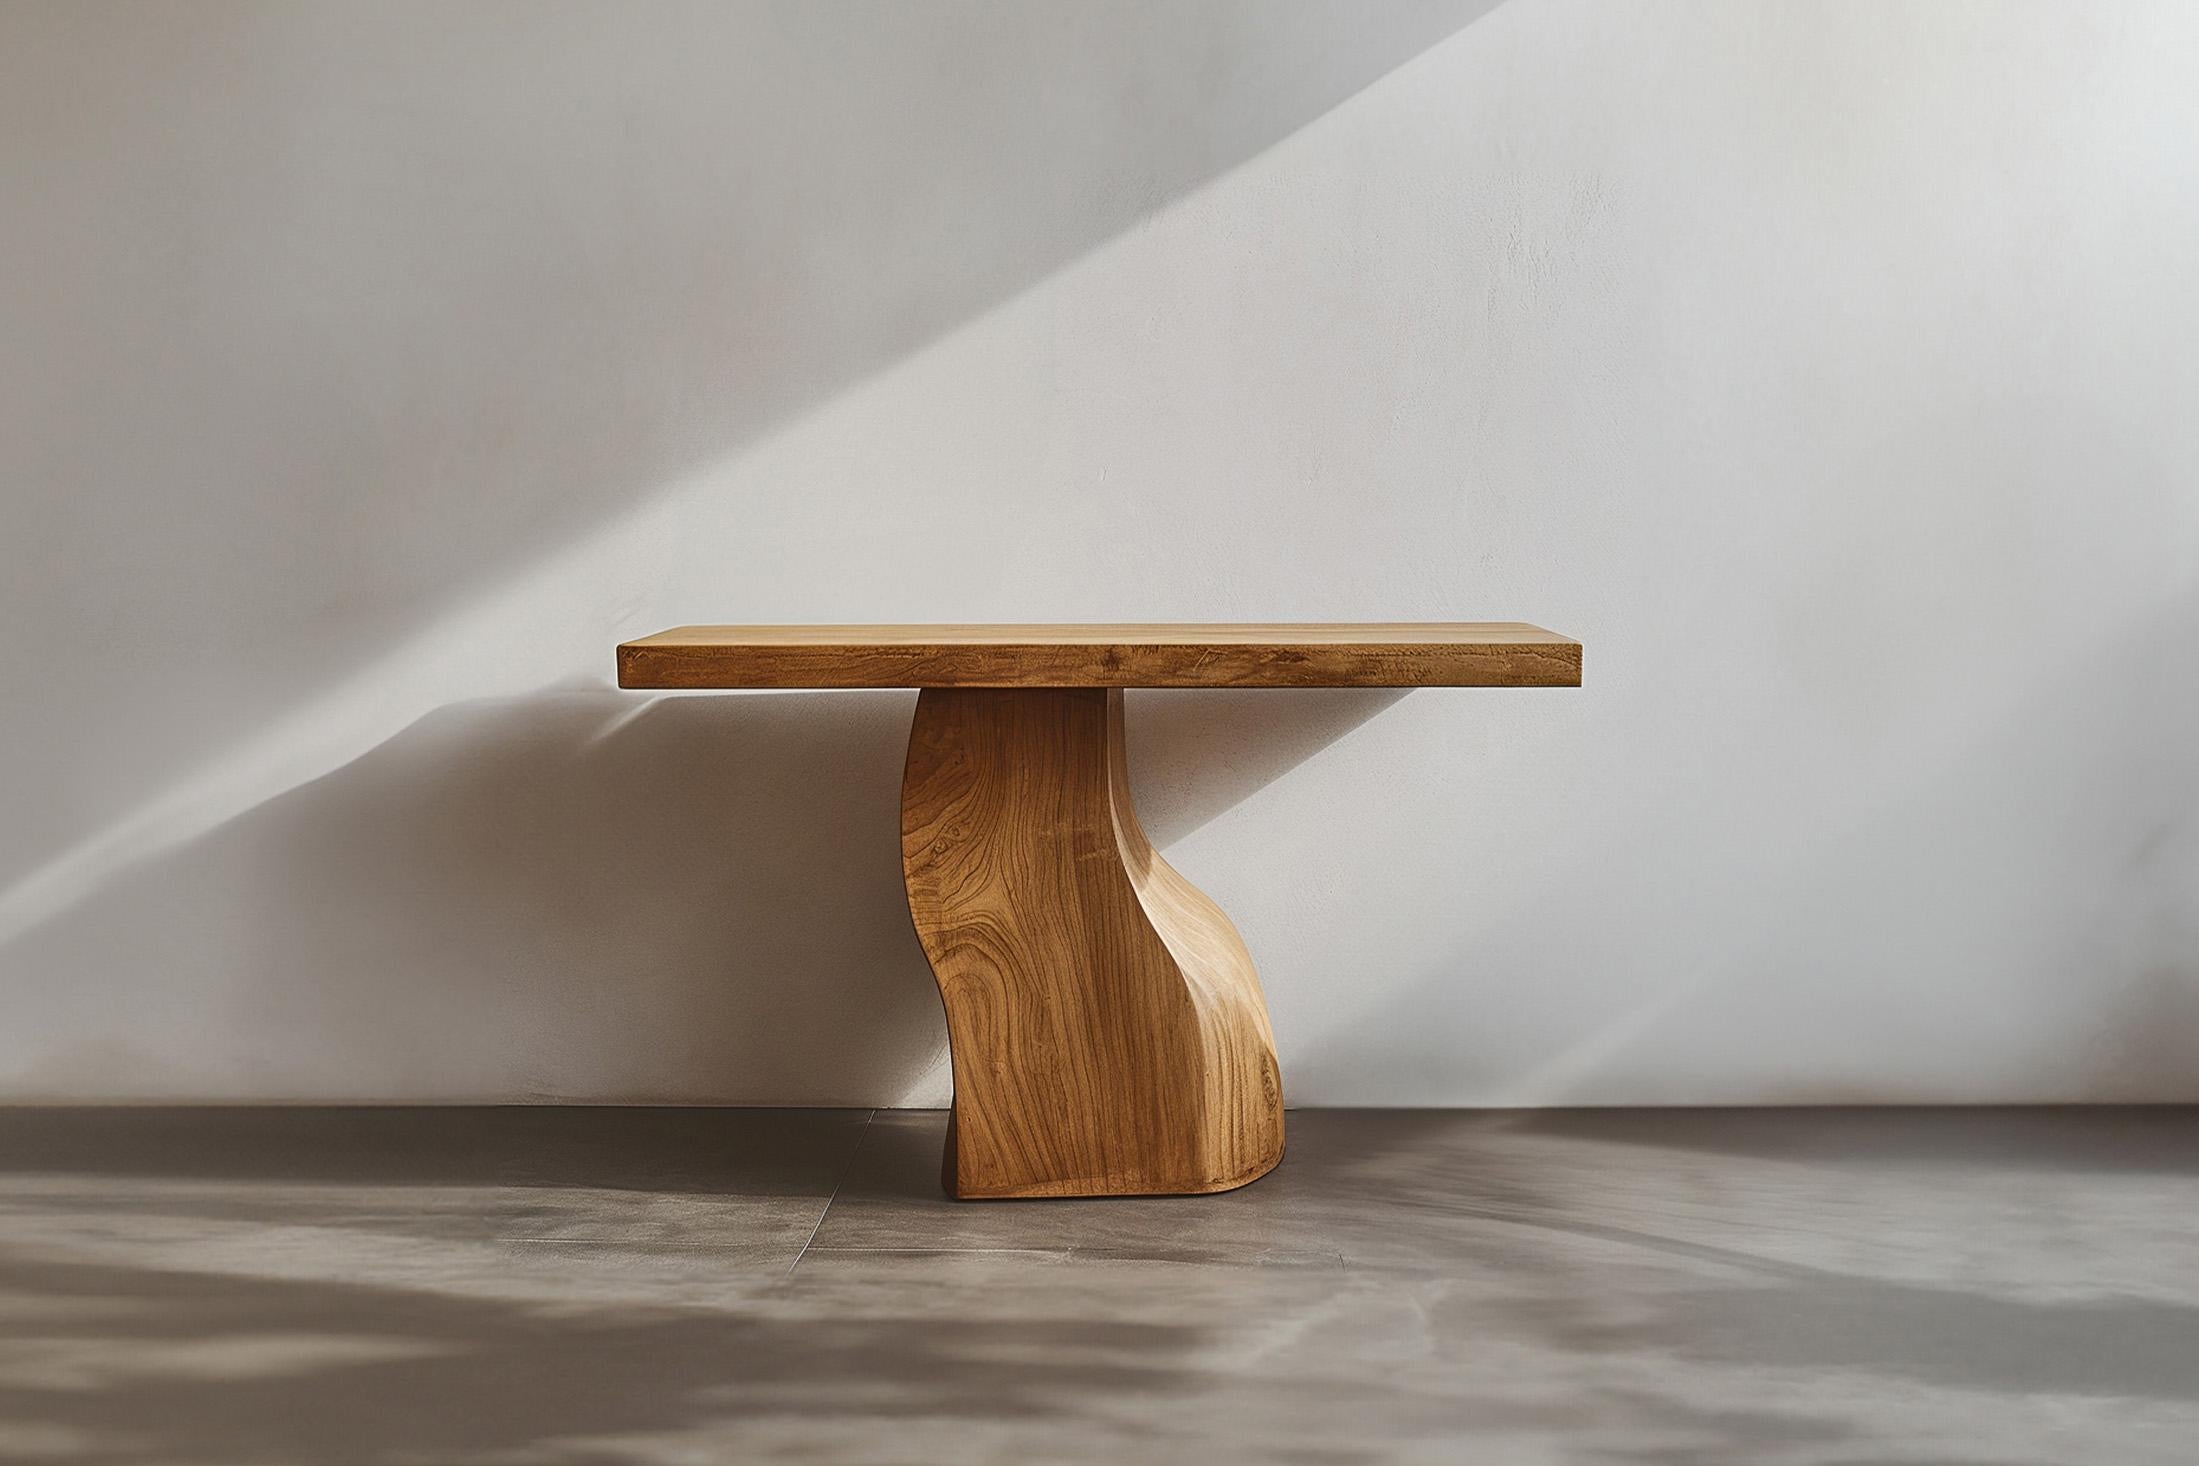 Elefante by NONO Console 20, Slender Oak Elegance, Substantial Presence
—————————————————————
Elefante Collection: A Harmony of Design and Heritage by NONO

Crafting Elegance with a Modernist Touch

NONO, renowned for its decade-long journey in